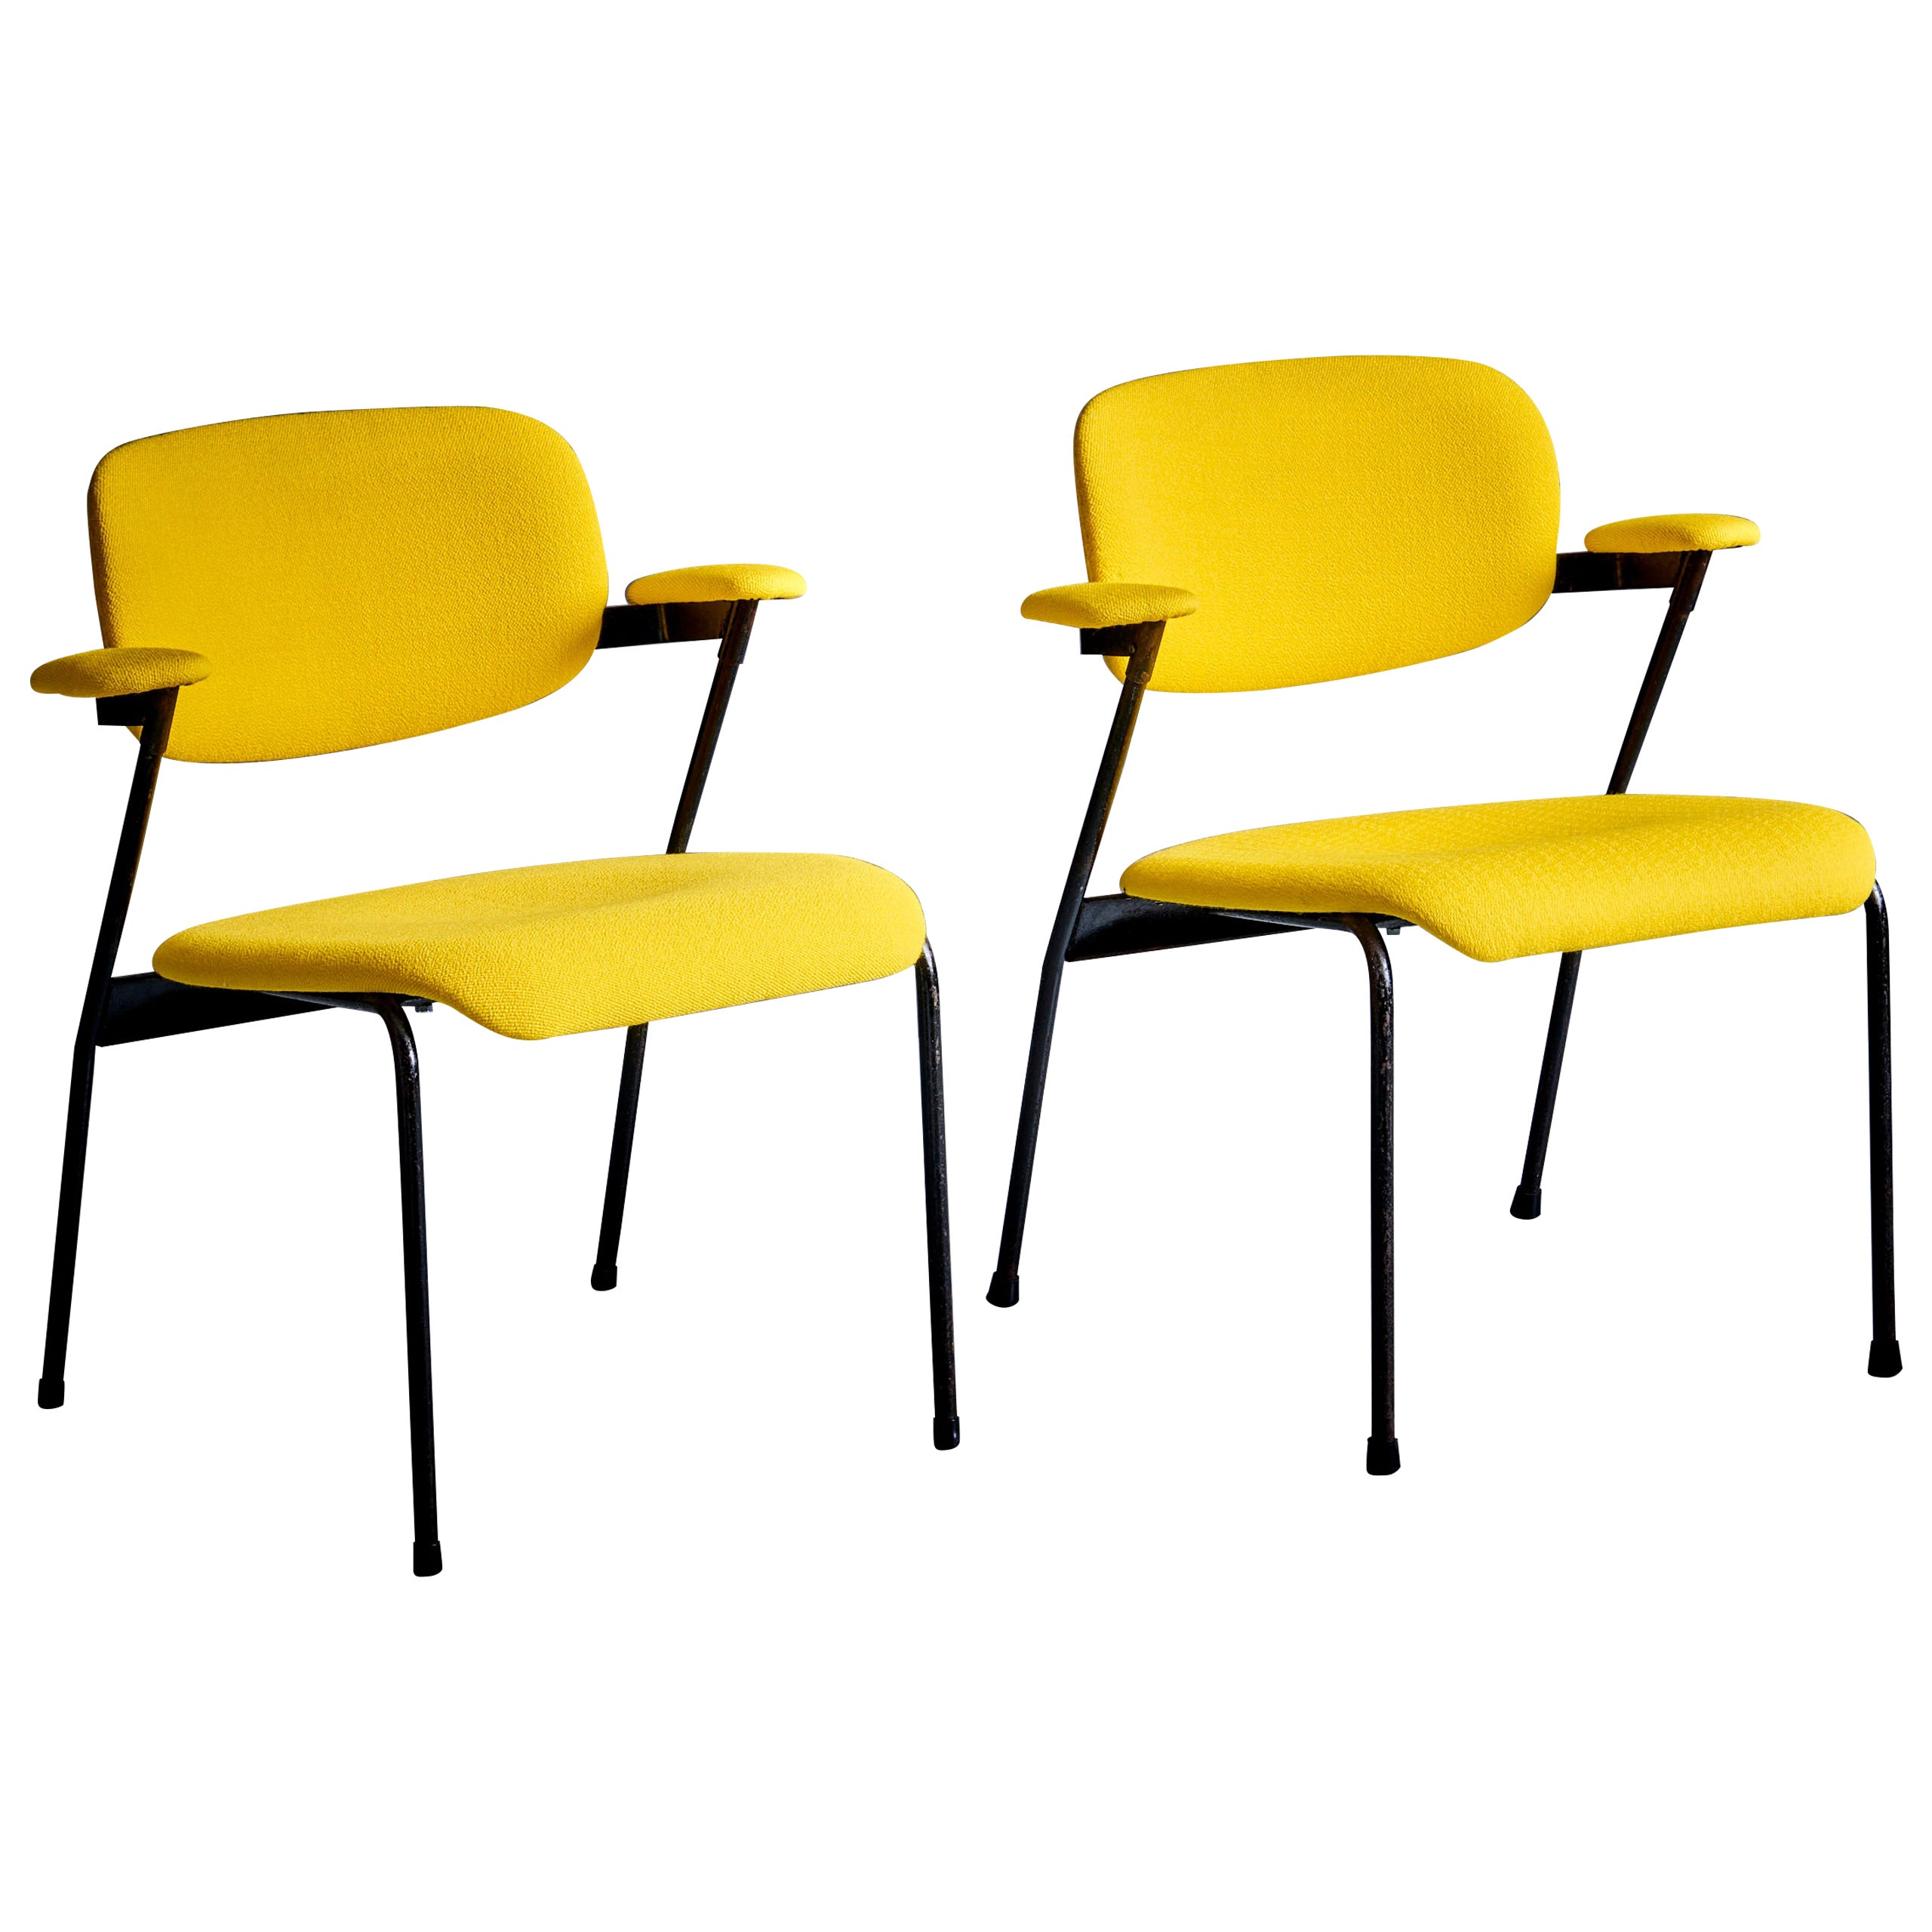 Willy van der Meeren for Tubax Pair of Lounge Chairs in yellow For Sale